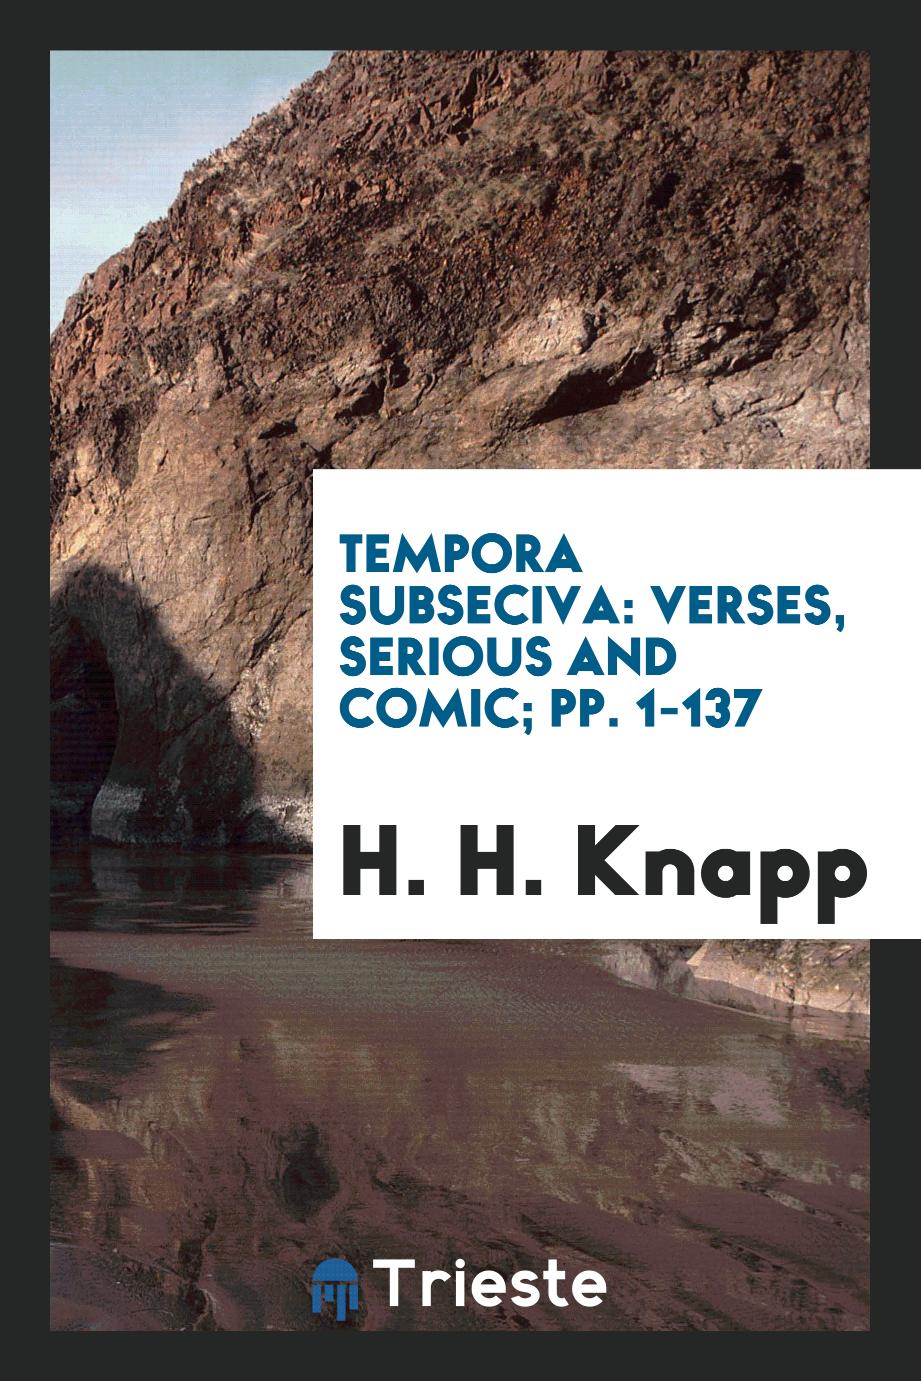 Tempora Subseciva: Verses, Serious and Comic; pp. 1-137